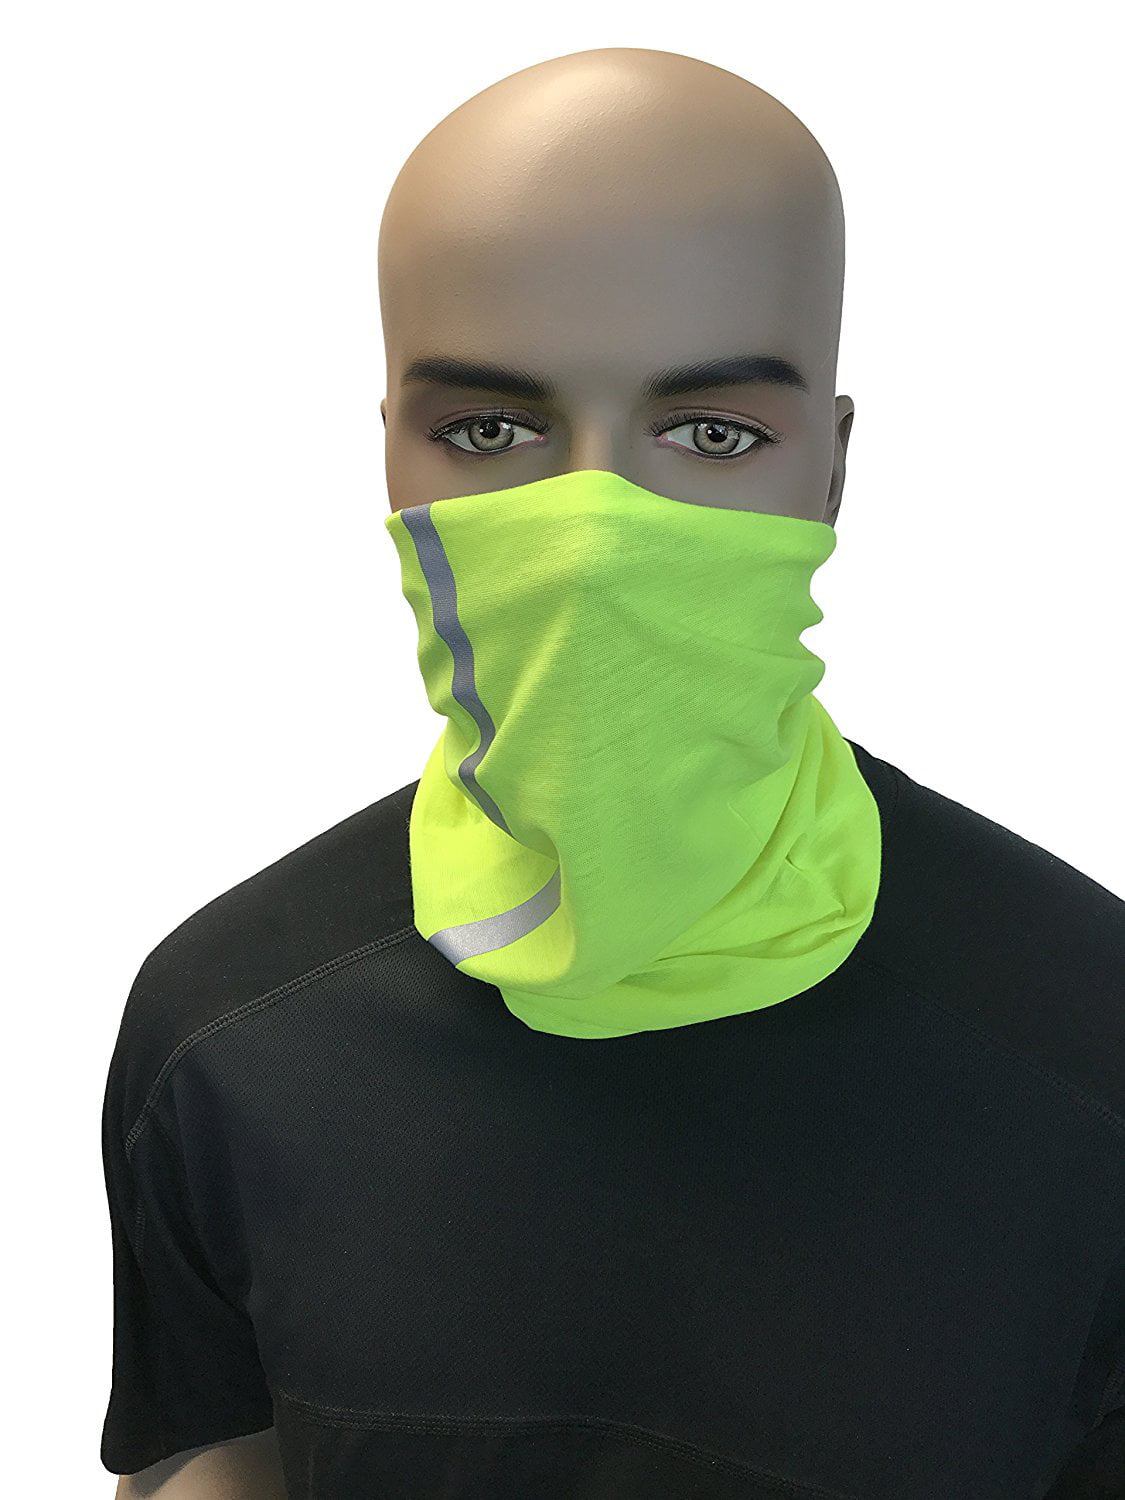 Sikye Unisex Fasion Seamless Face Mask Outdoor Sports 3D Print Windproof Quick-Drying Neck Warmer for Riding,Cycling,Ski,Snowboard